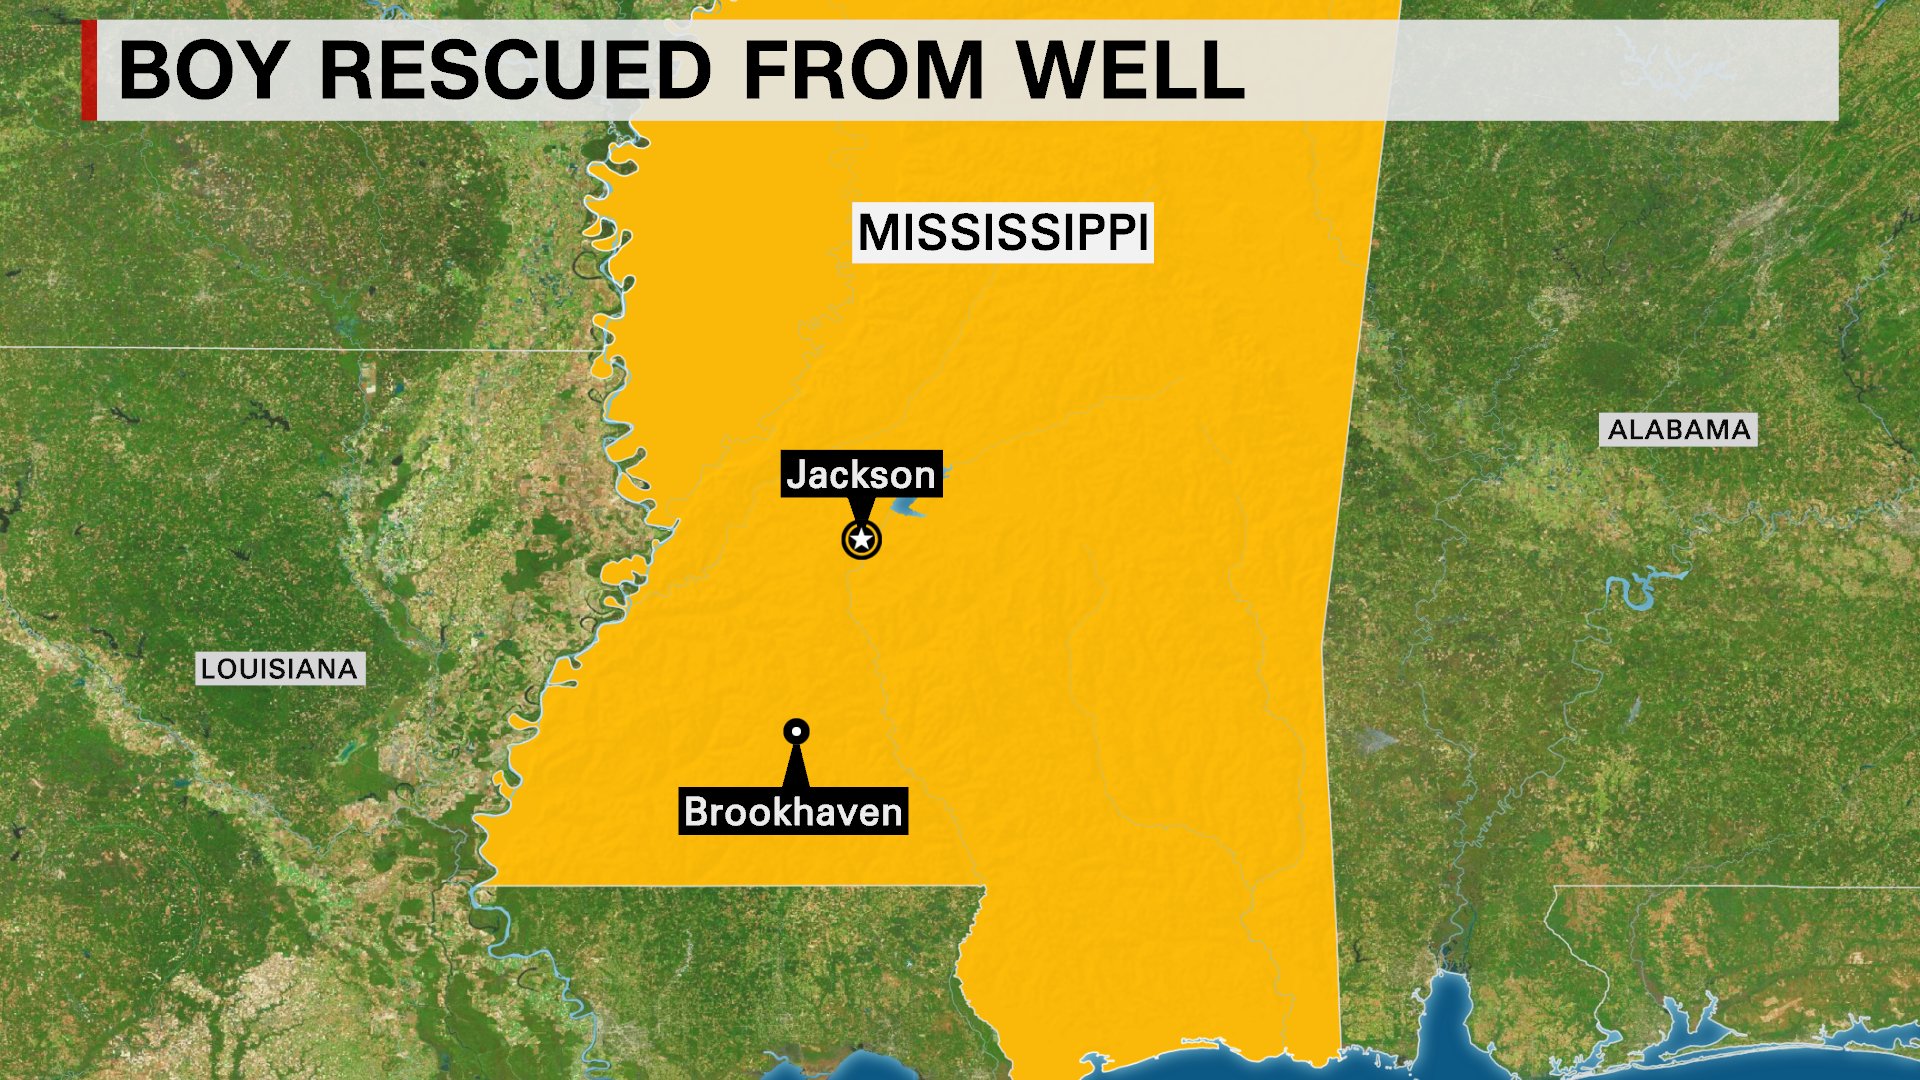 A 4-year-old Mississippi boy and his dog were rescued Monday, September 7, 2015, after falling into a well, authorities said. The two spent about three hours 25 feet down in the well, Clifford Galey, civil defense director for Lincoln County, Mississippi, told CNN.